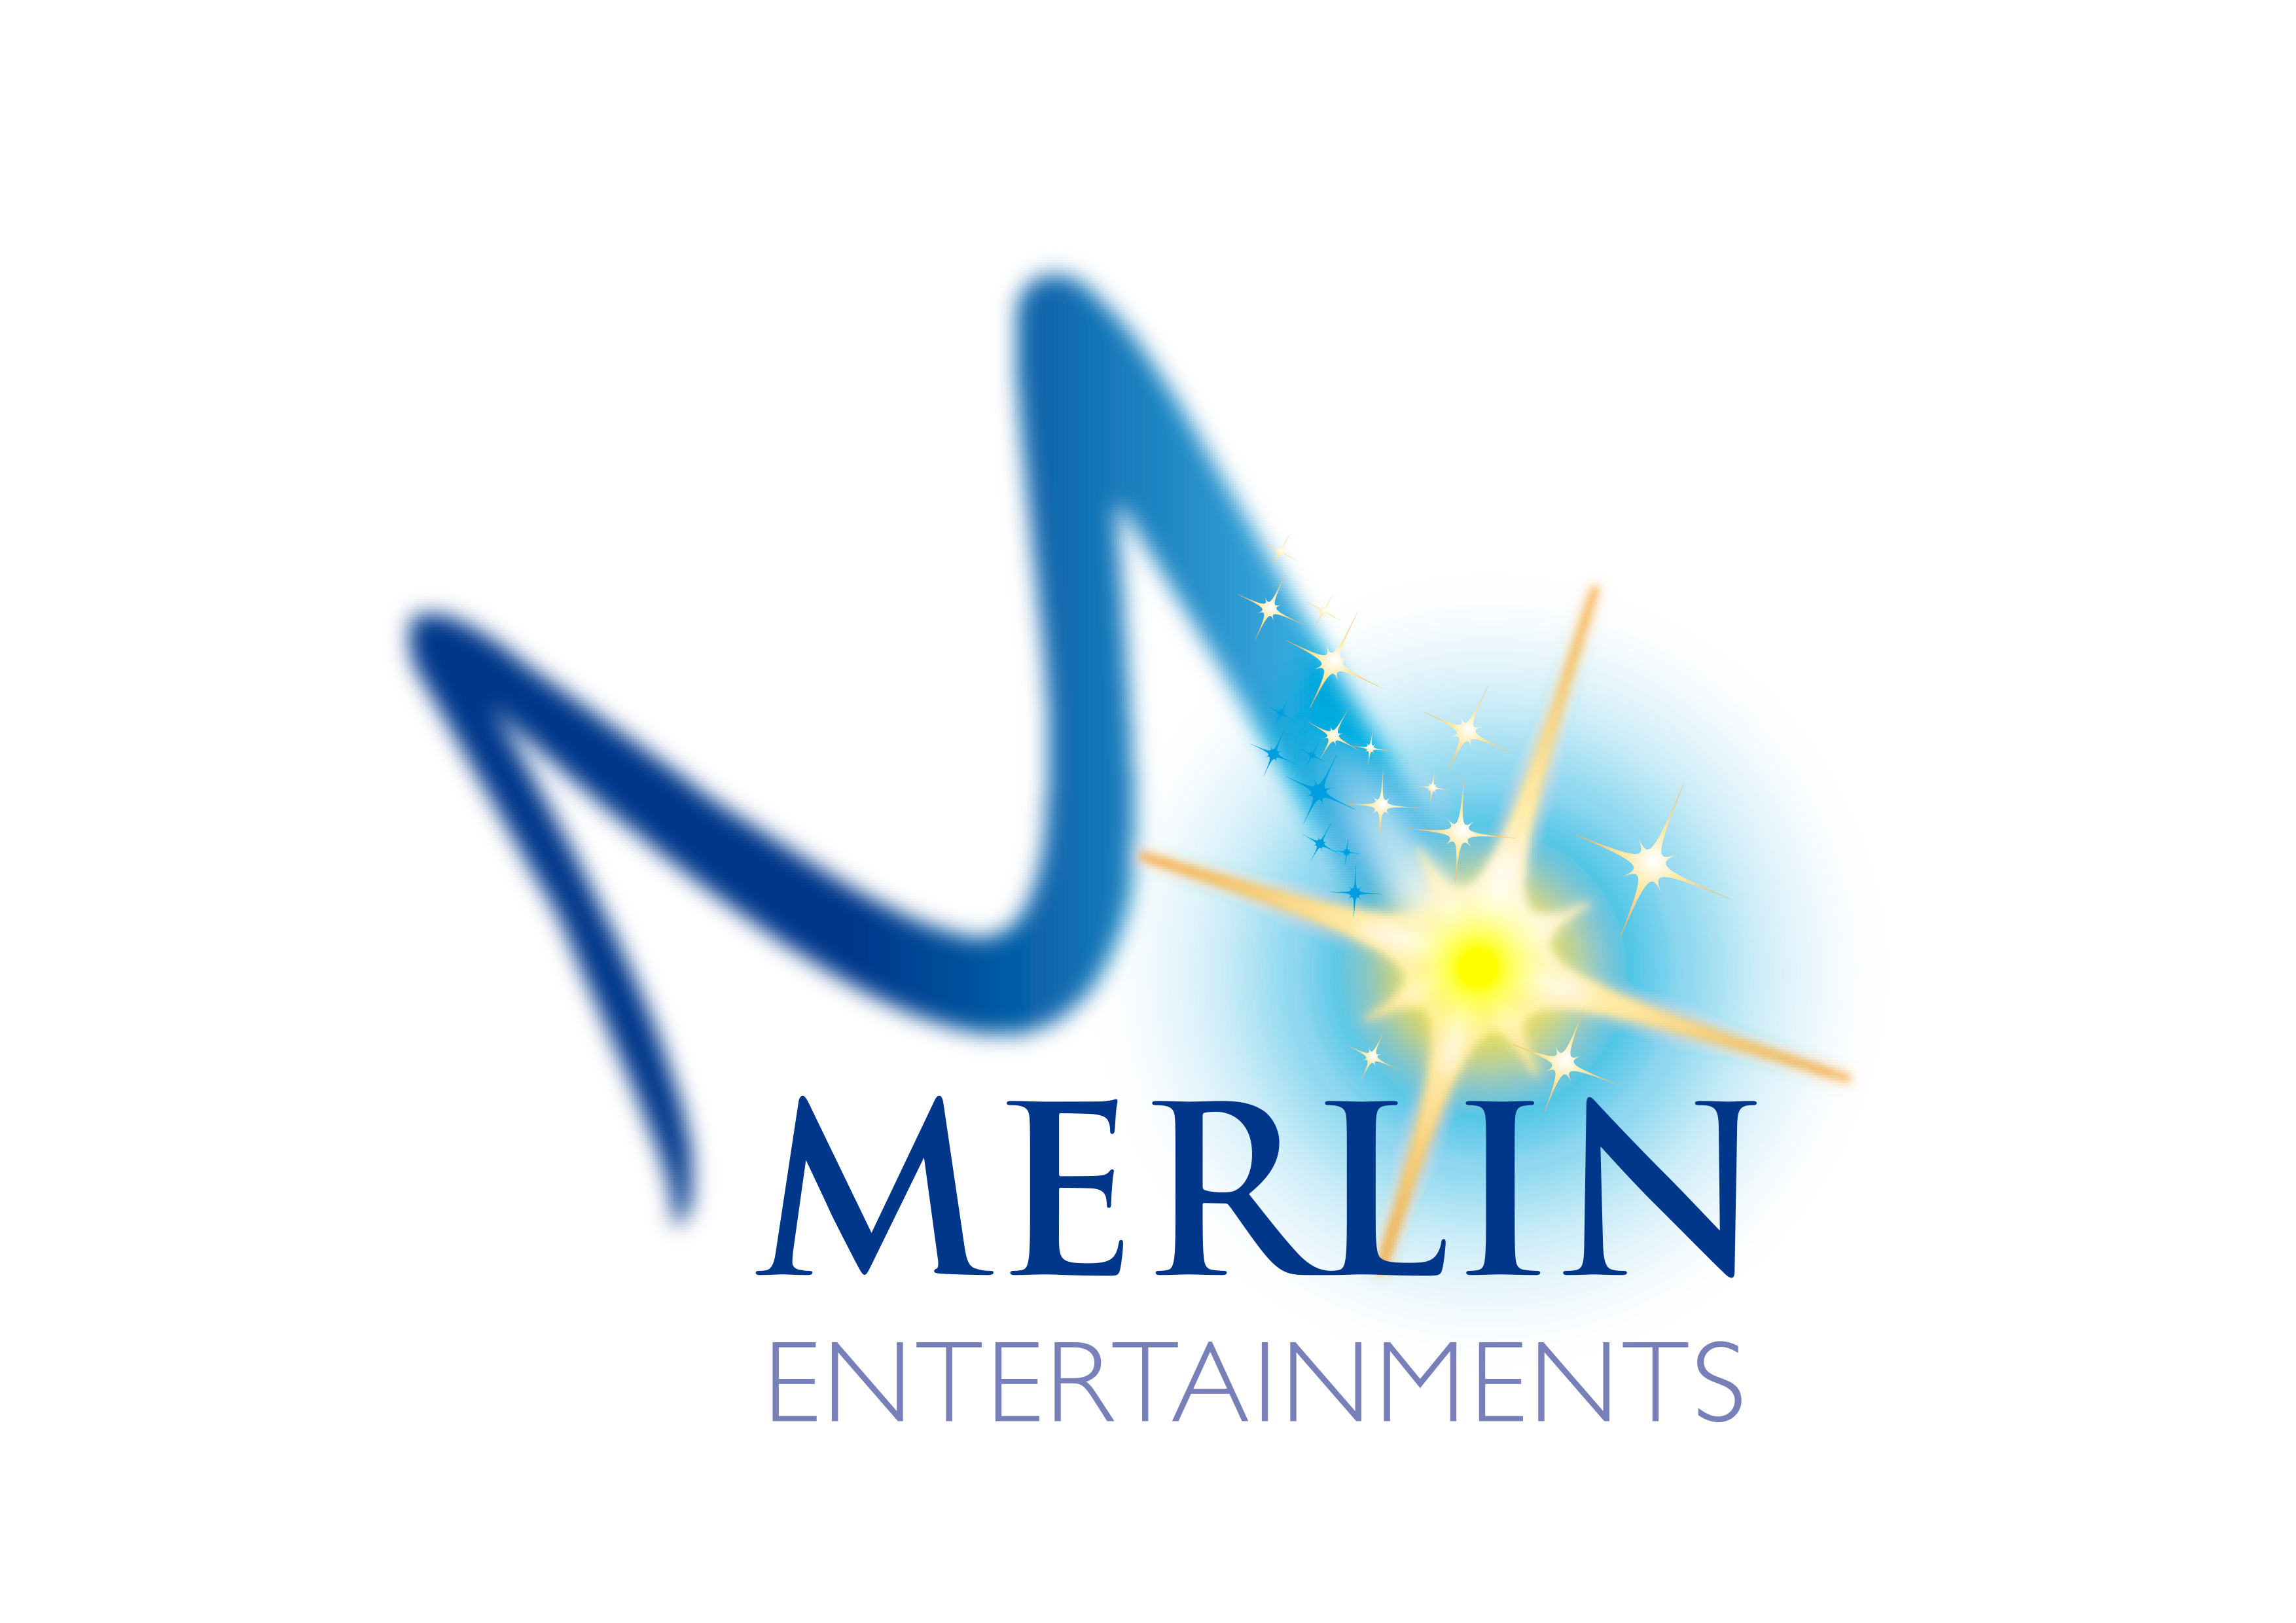 Merlin Entertainment Group Promotional Video